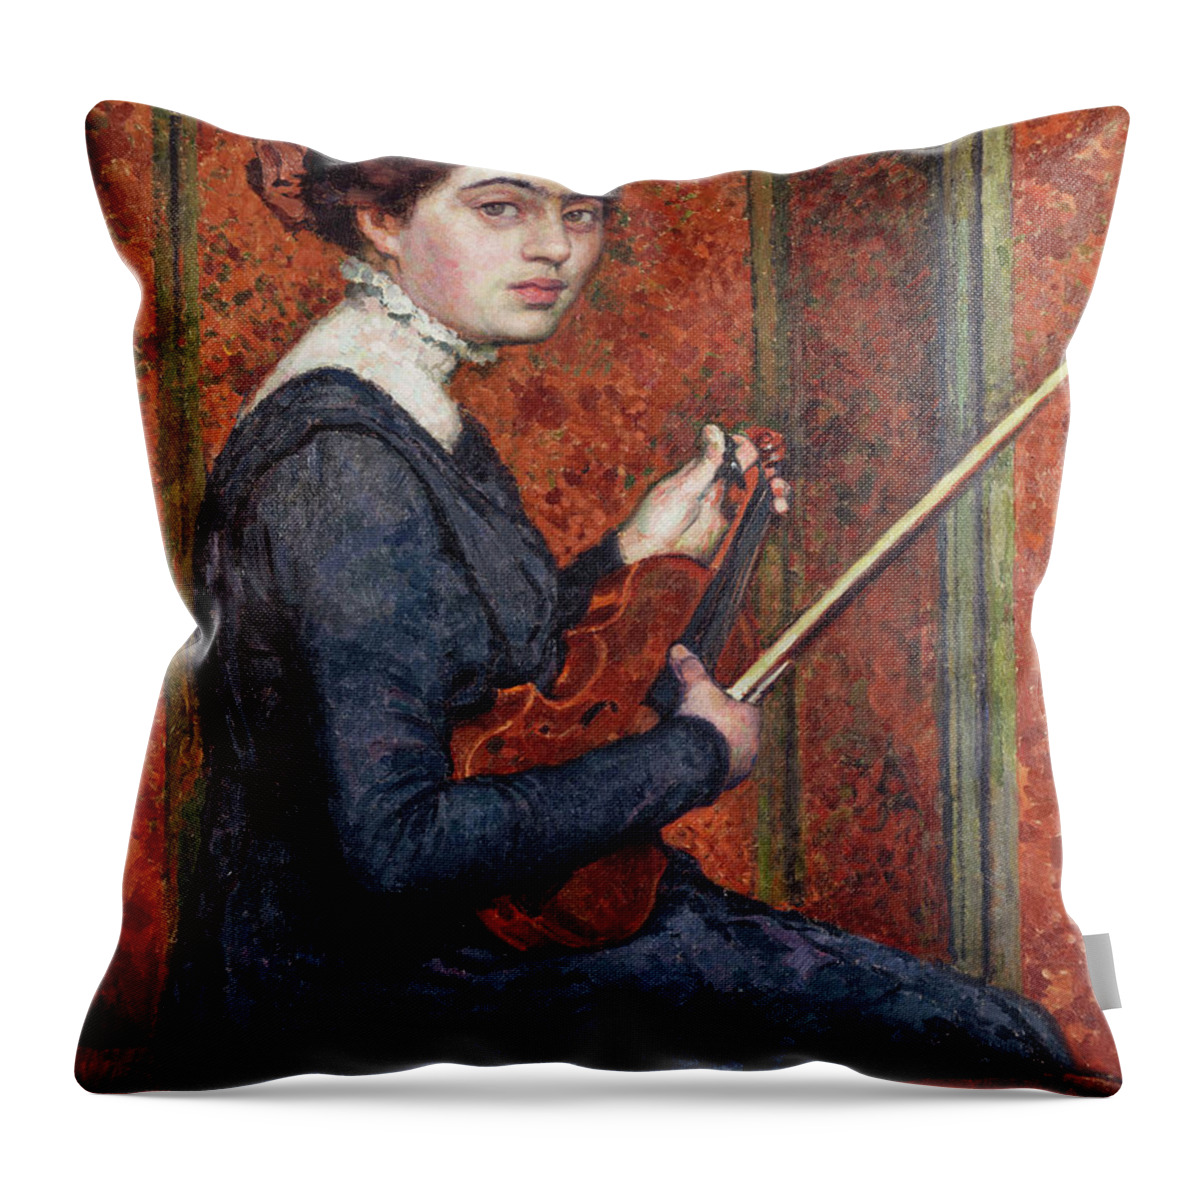 Hair Style Throw Pillow featuring the painting Woman With Violin by Theo Van Rysselberghe